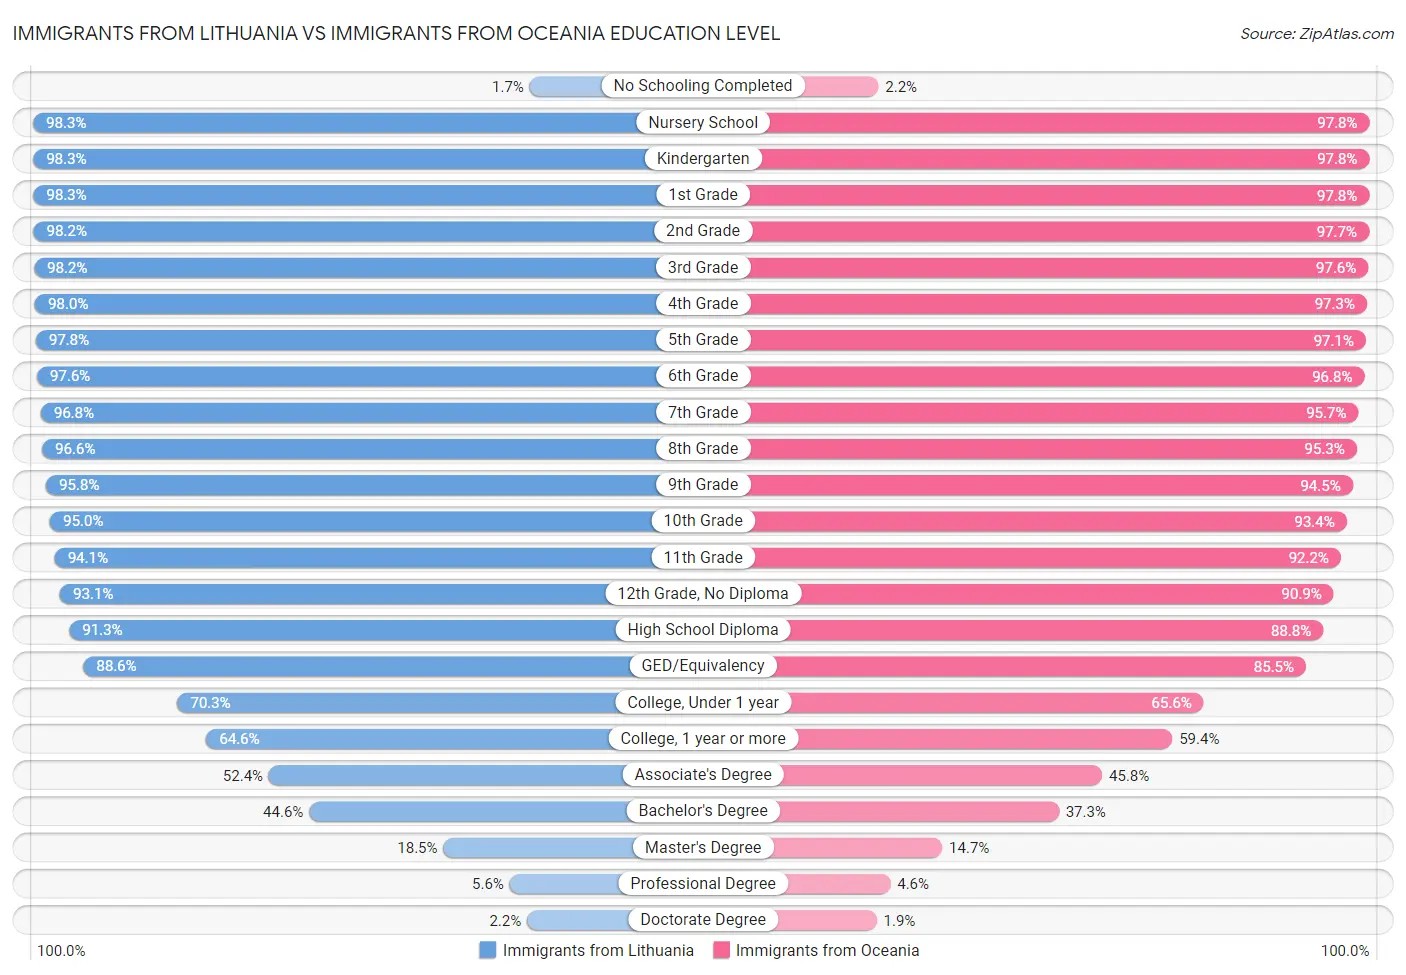 Immigrants from Lithuania vs Immigrants from Oceania Education Level